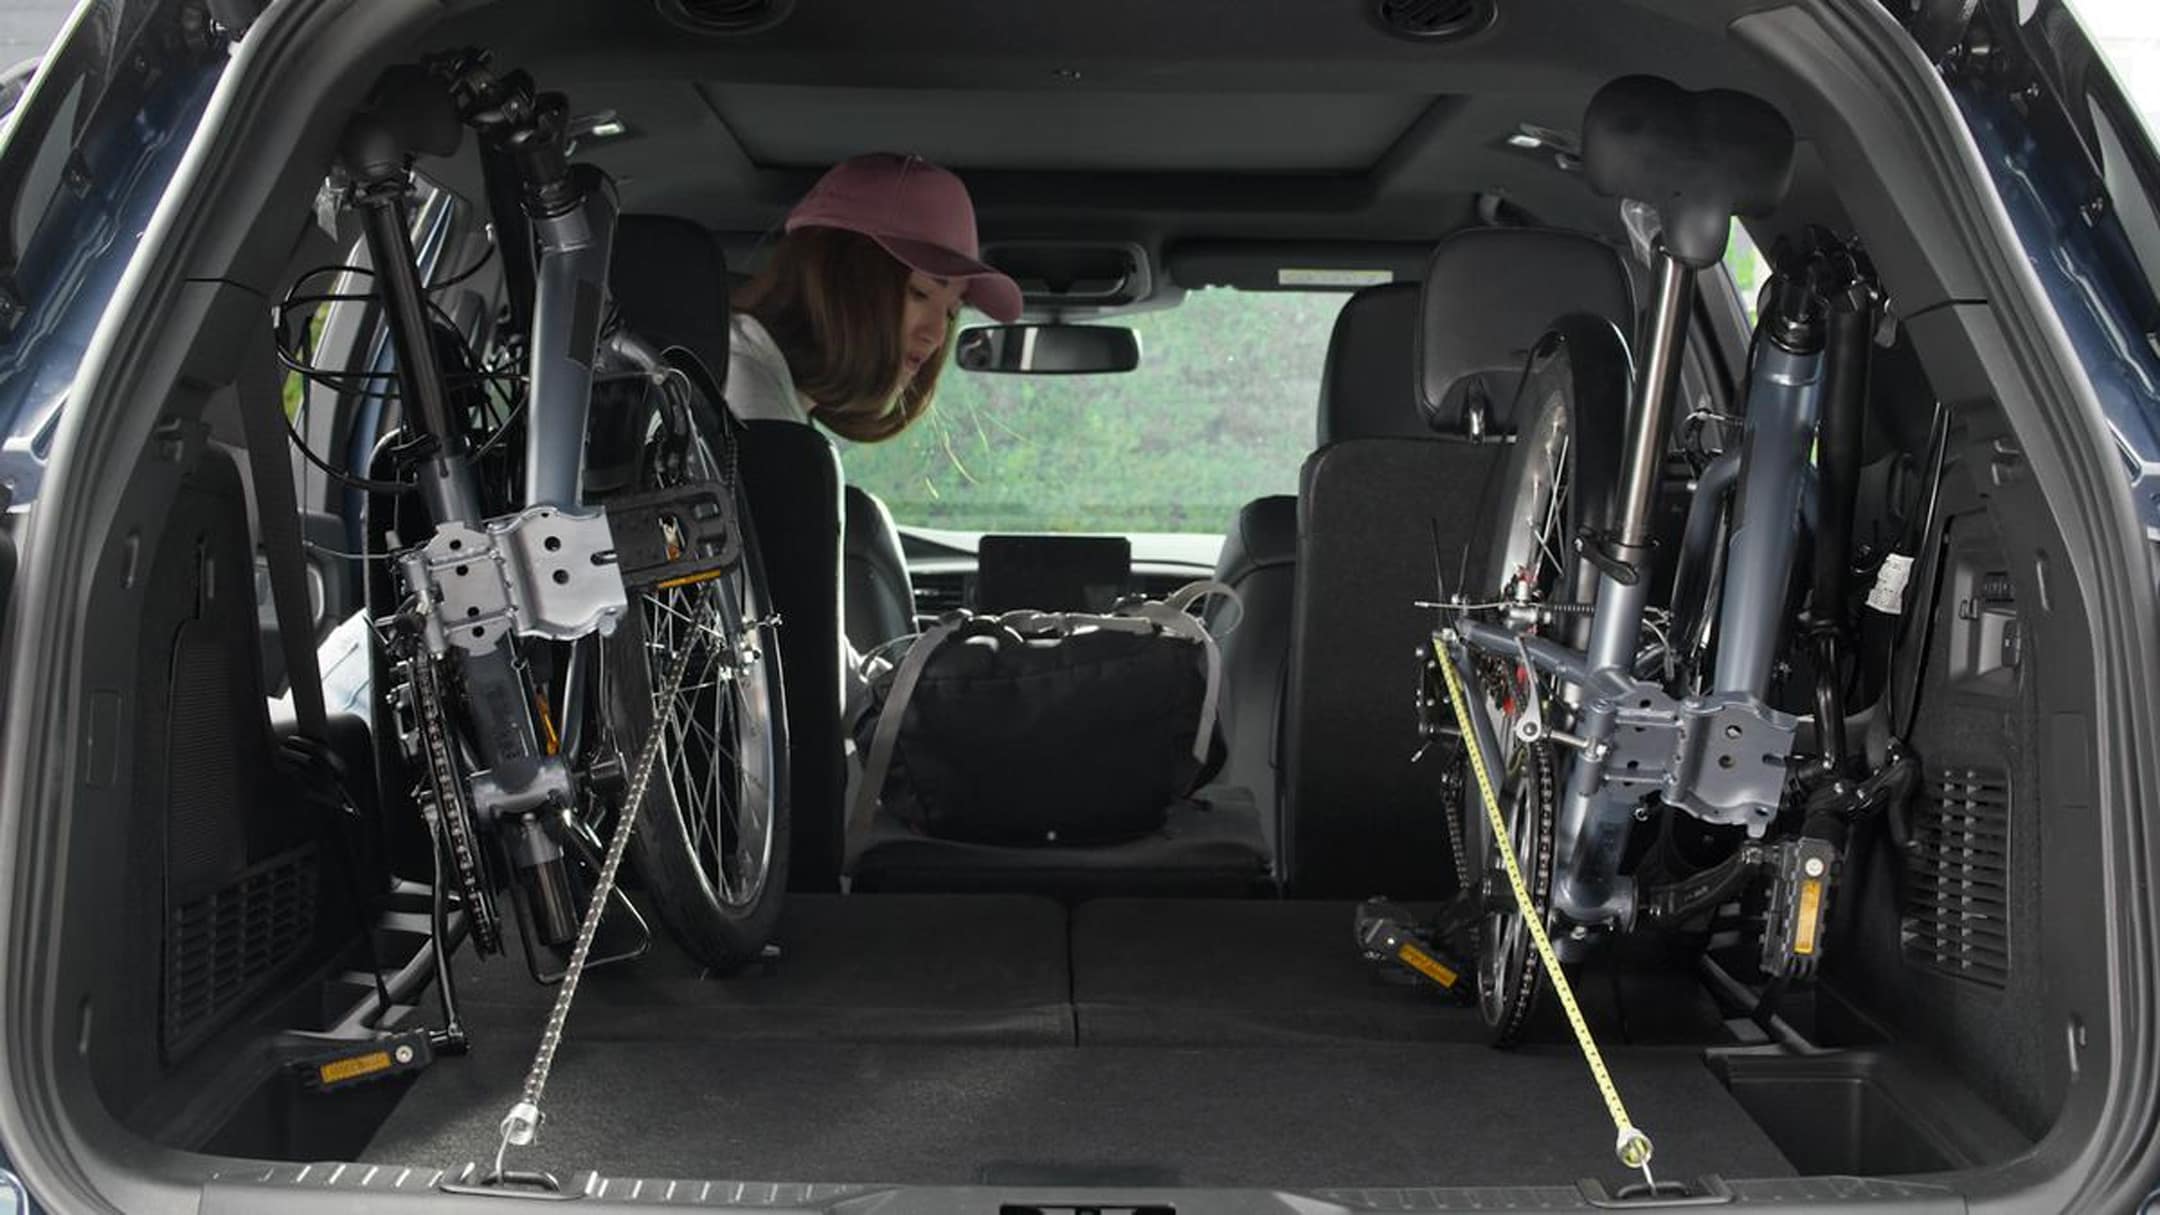 Ford Explorer detail of interior with folded bikes showing generous load space